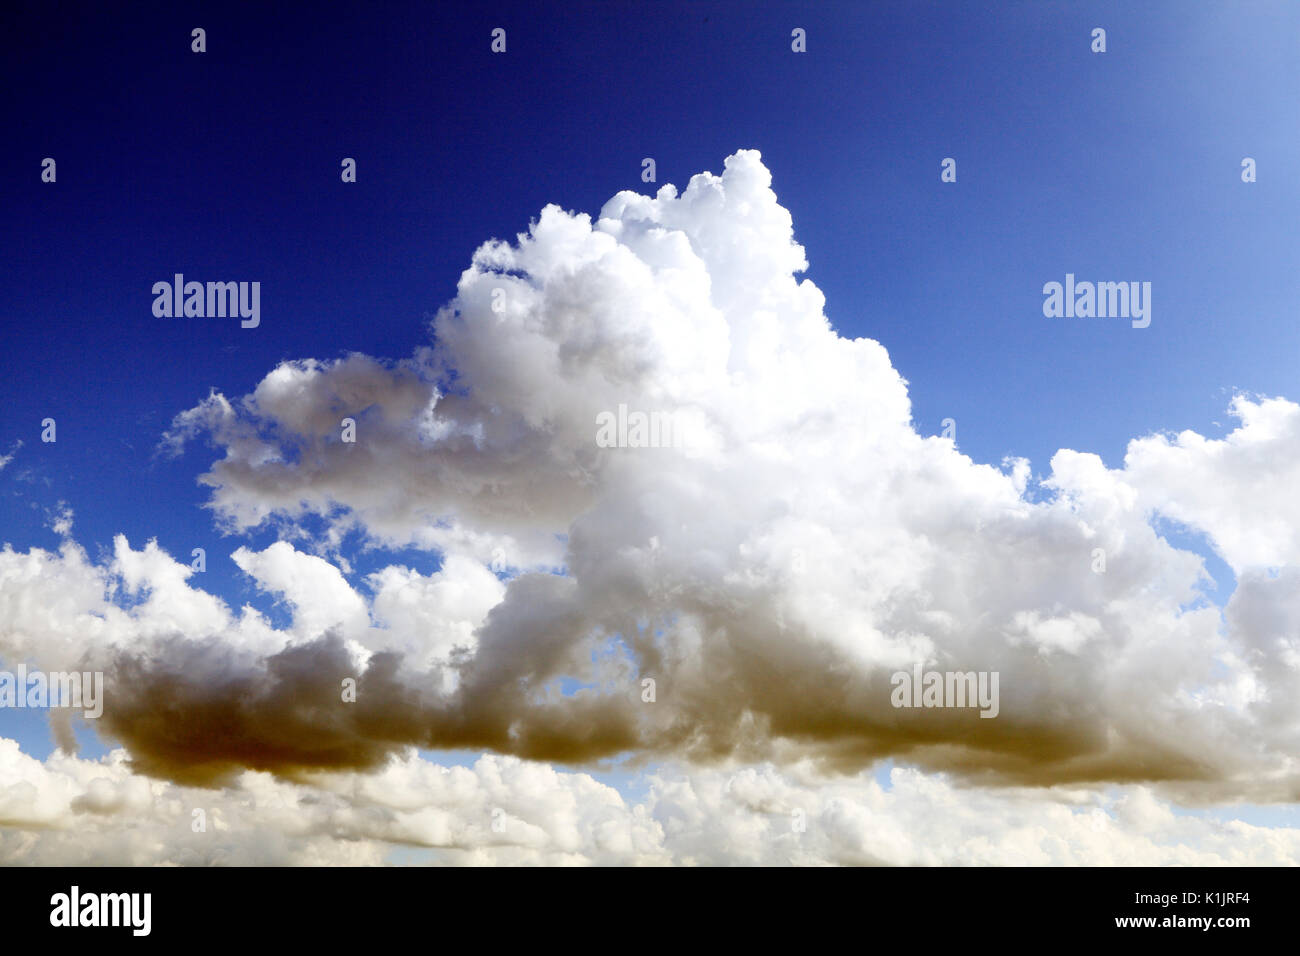 White and dark cumulous cloud, clouds, sky, skies, blue sky, weather, climate, England, UK Stock Photo